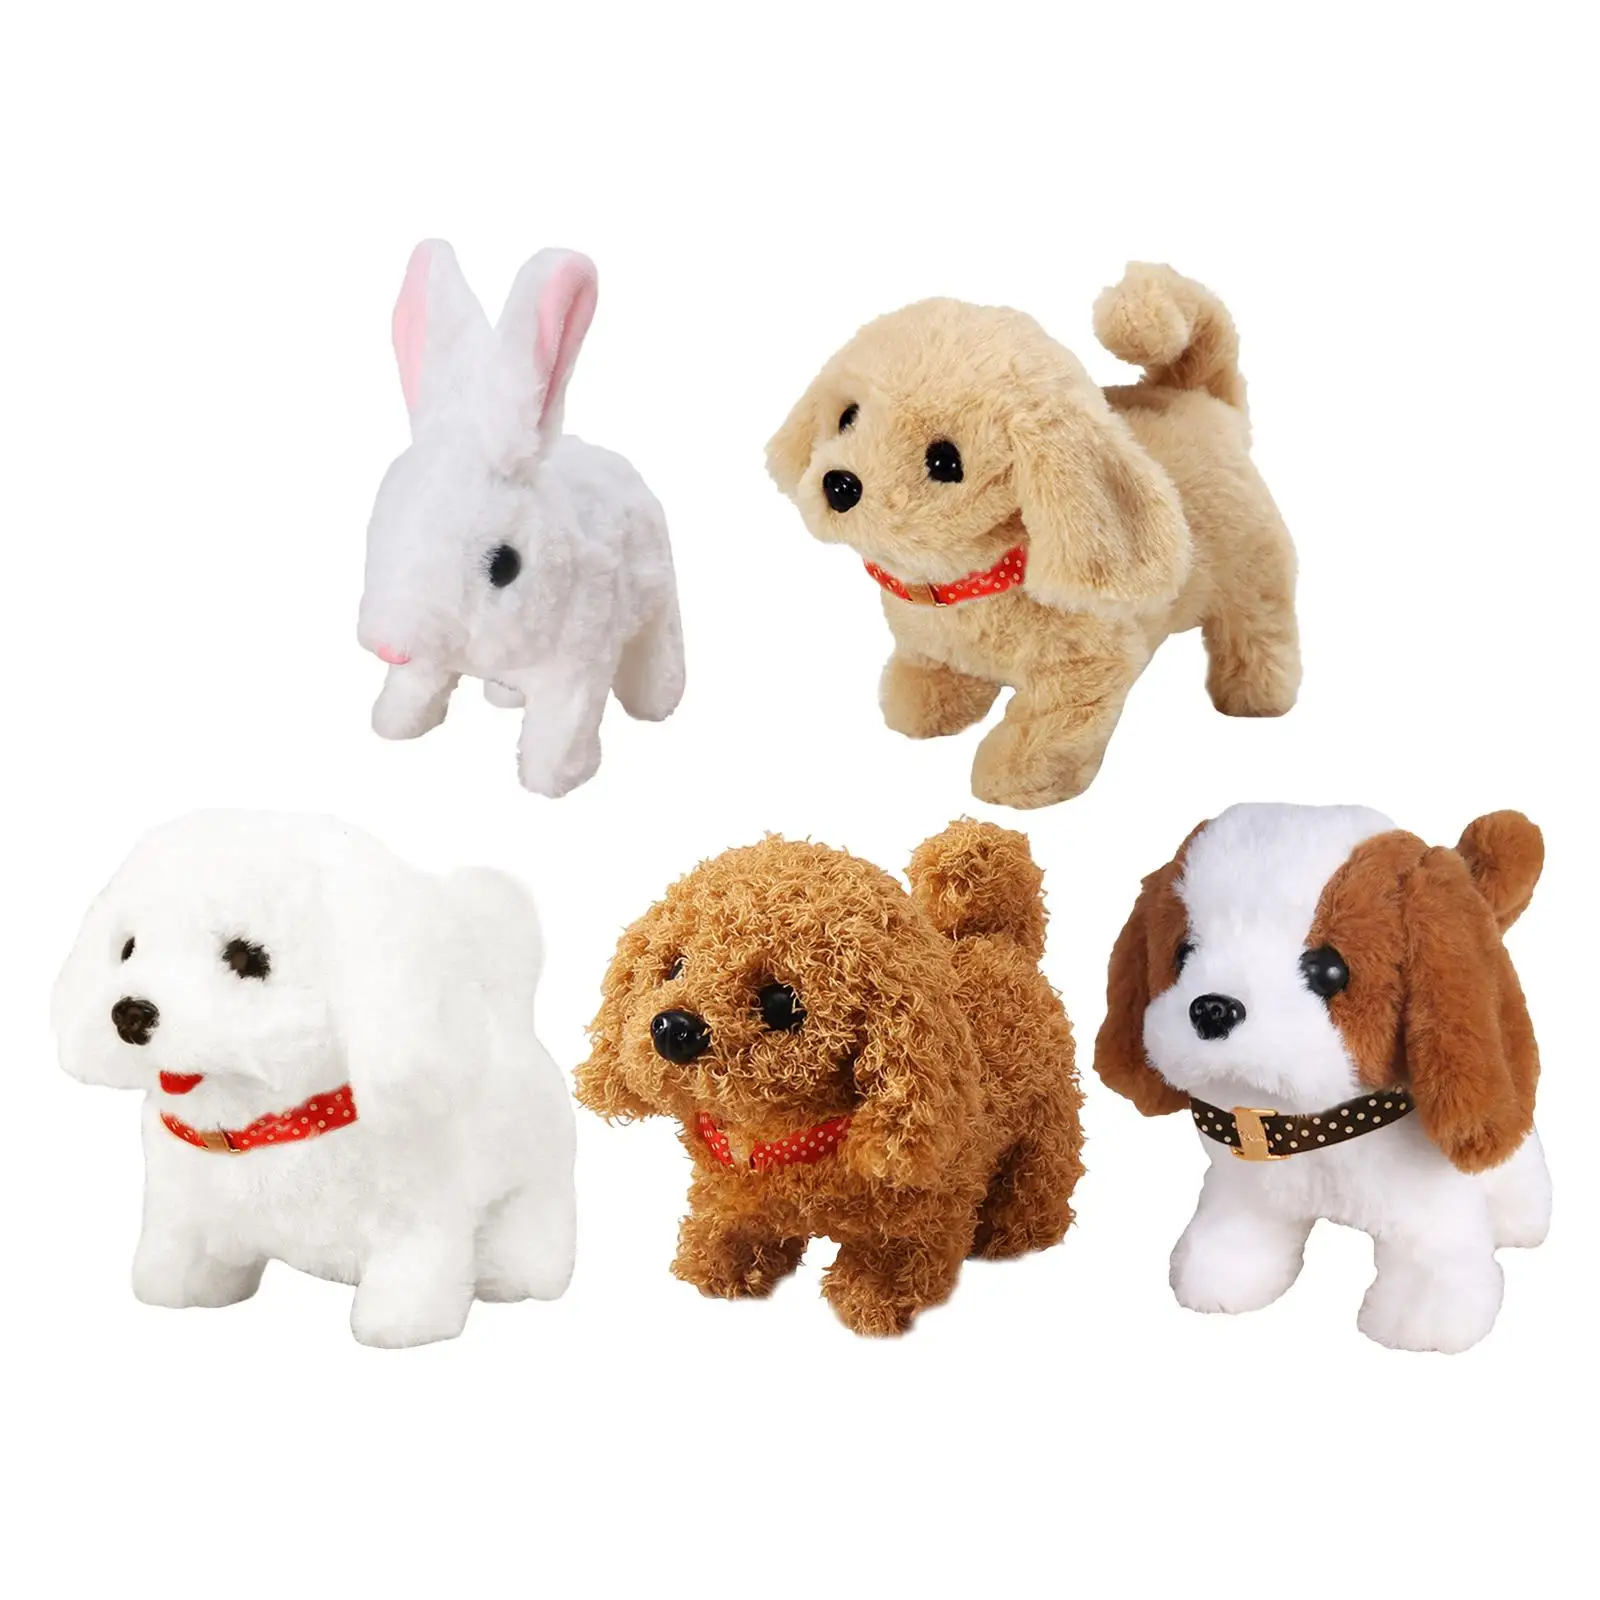 Simulation Electric Plush Toy Tail Wagging Interesting Toy Interactive Animal Toy for Kids Toddlers Girls Boy Birthday Gifts